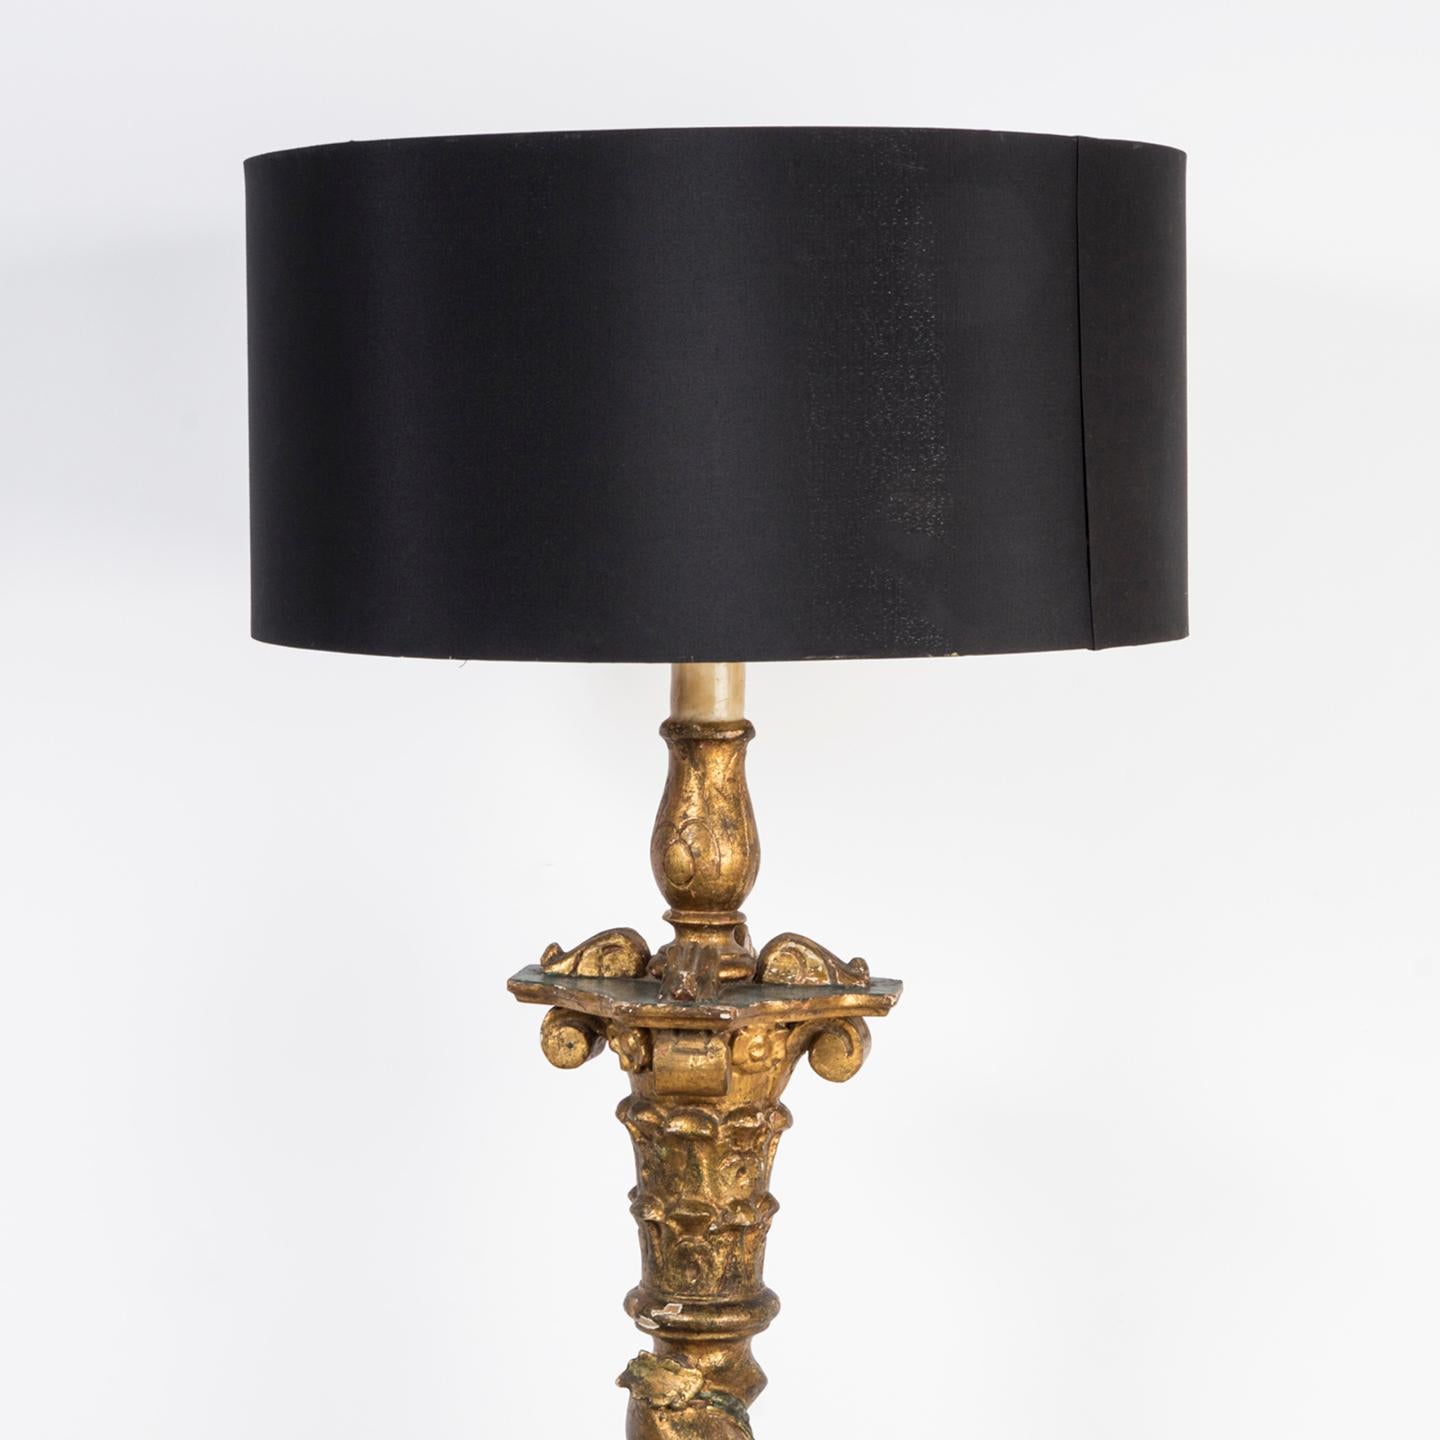 Very decorative Italian gilt wood standing floor lamp, adorned with intricate grape and leaf motifs, making it exceptionally decorative. Mid 19th Century, 1850s

The lamp stands as a testament to craftsmanship, with its gilt wood construction